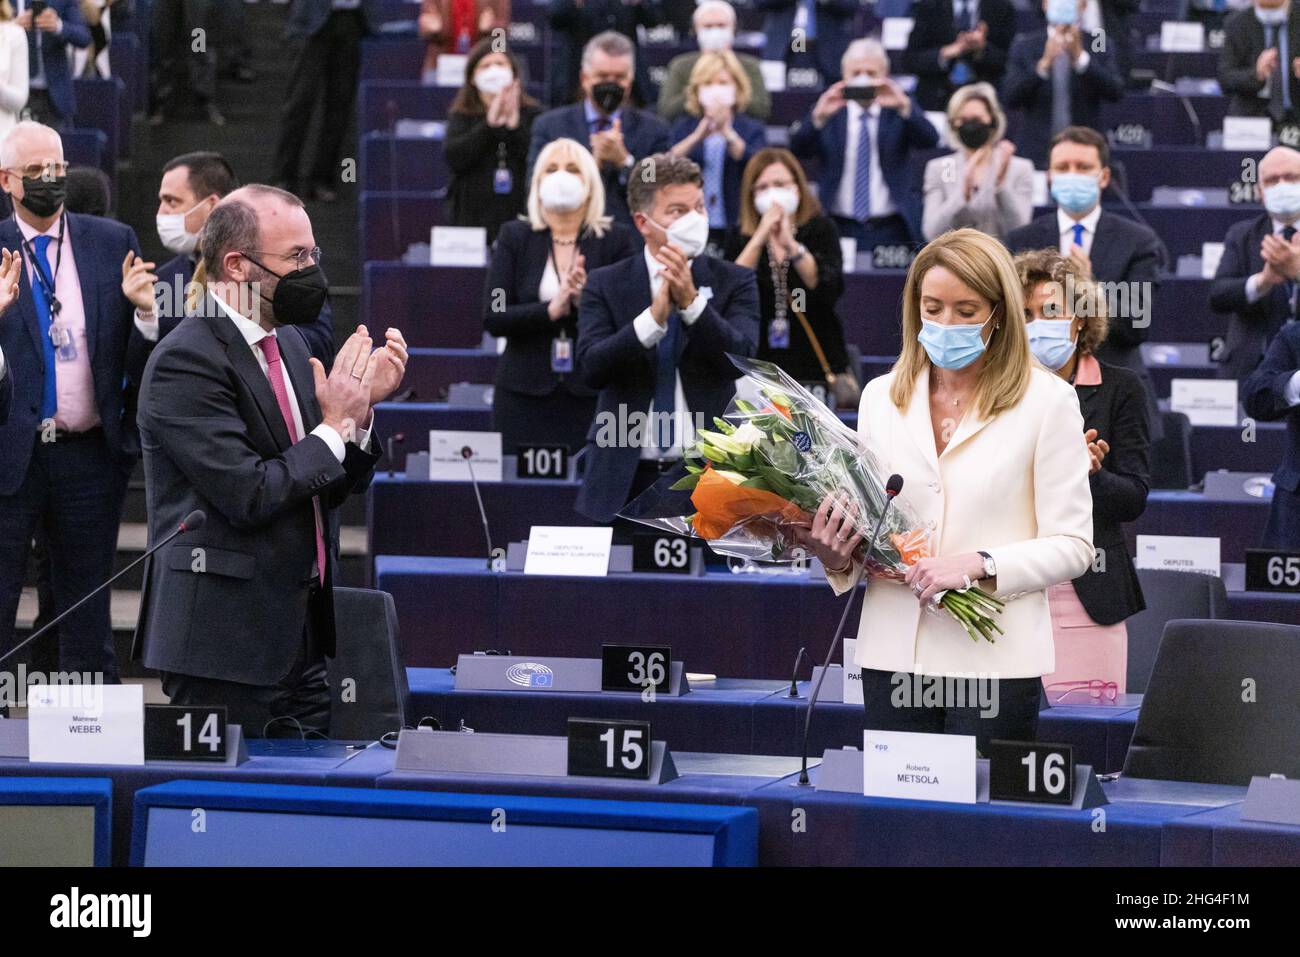 18 January 2022, France, Straßburg: Roberta Metsola (r, Partit Nazzjonalista), EPP Group, stands in the European Parliament building after her election as President of the European Parliament while Manfred Weber (l, CSU), EPP Group, applauds her election victory together with other MEPs. Metsola was considered the favorite for the office and was able to prevail in the first round of voting. Photo: Philipp von Ditfurth/dpa Stock Photo